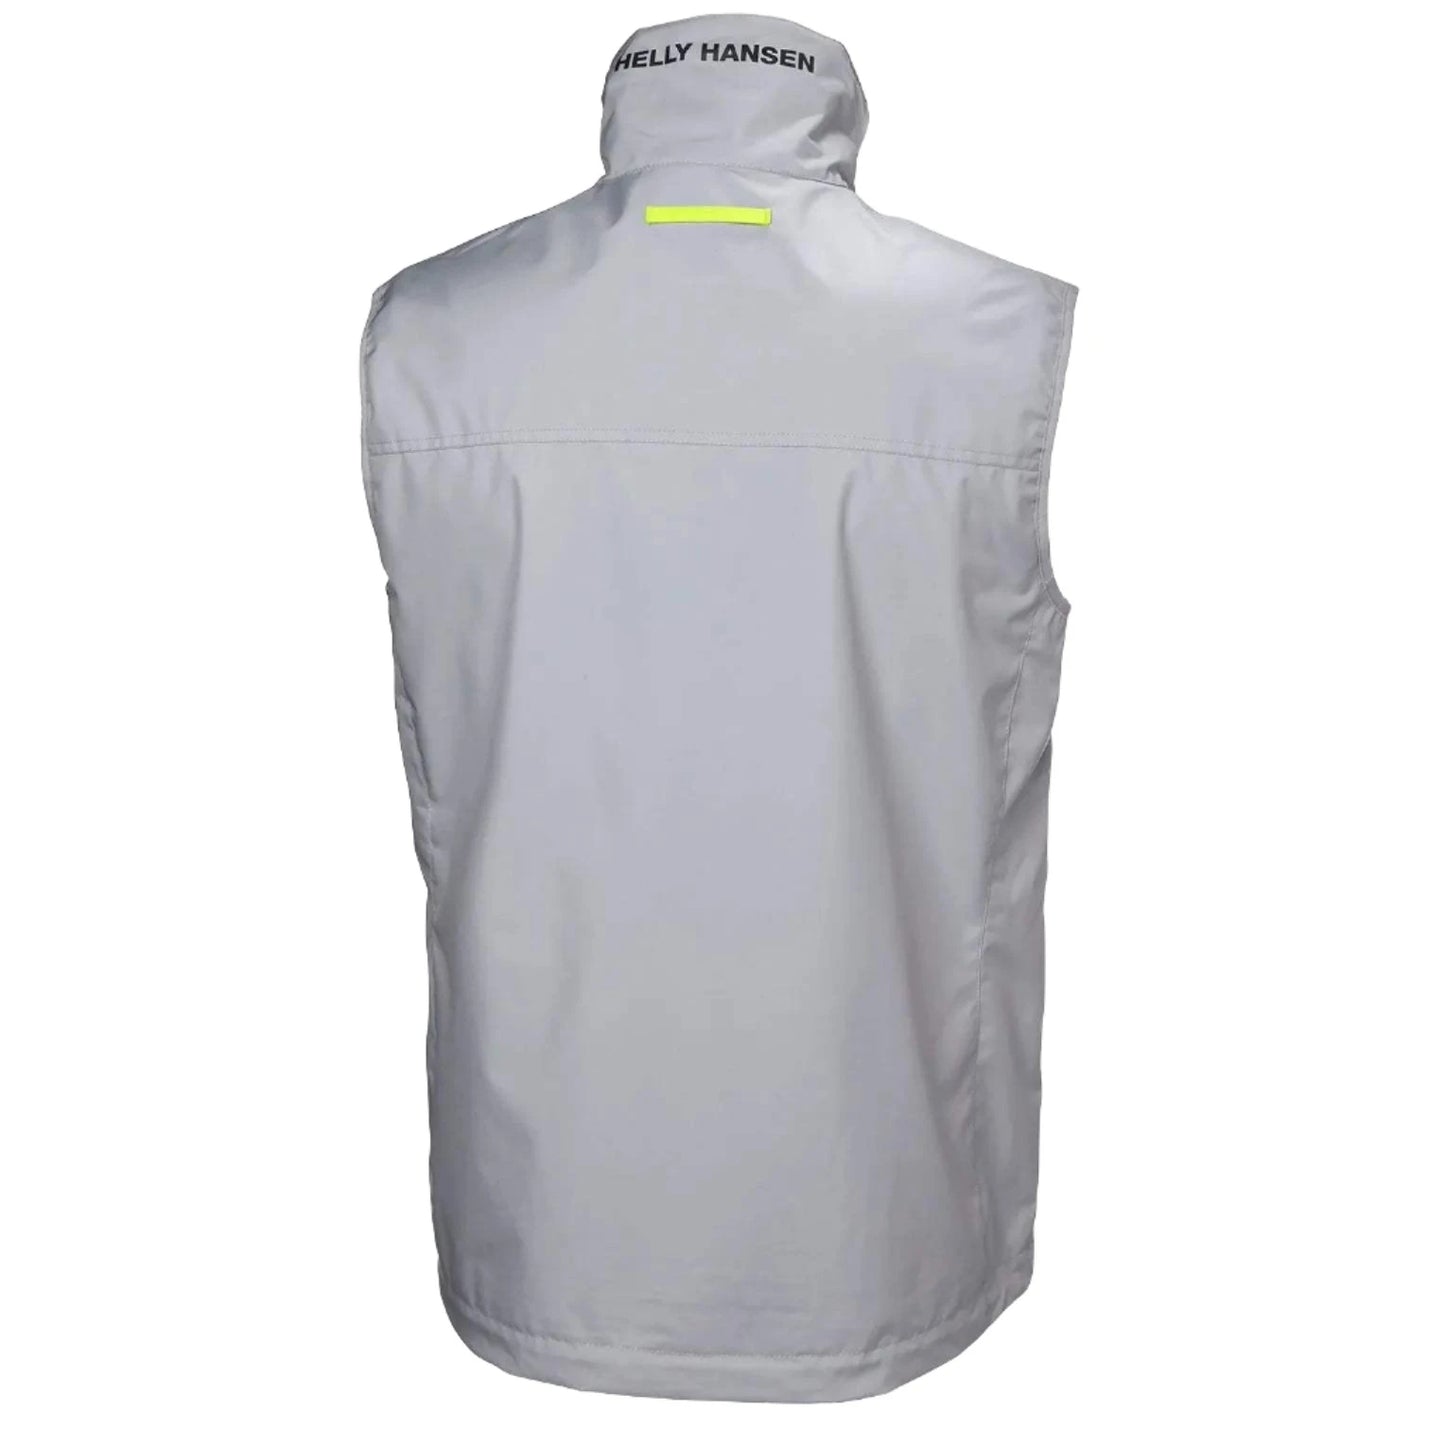 Helly Hansen Men's Crew Sailing Vest - The Luxury Promotional Gifts Company Limited